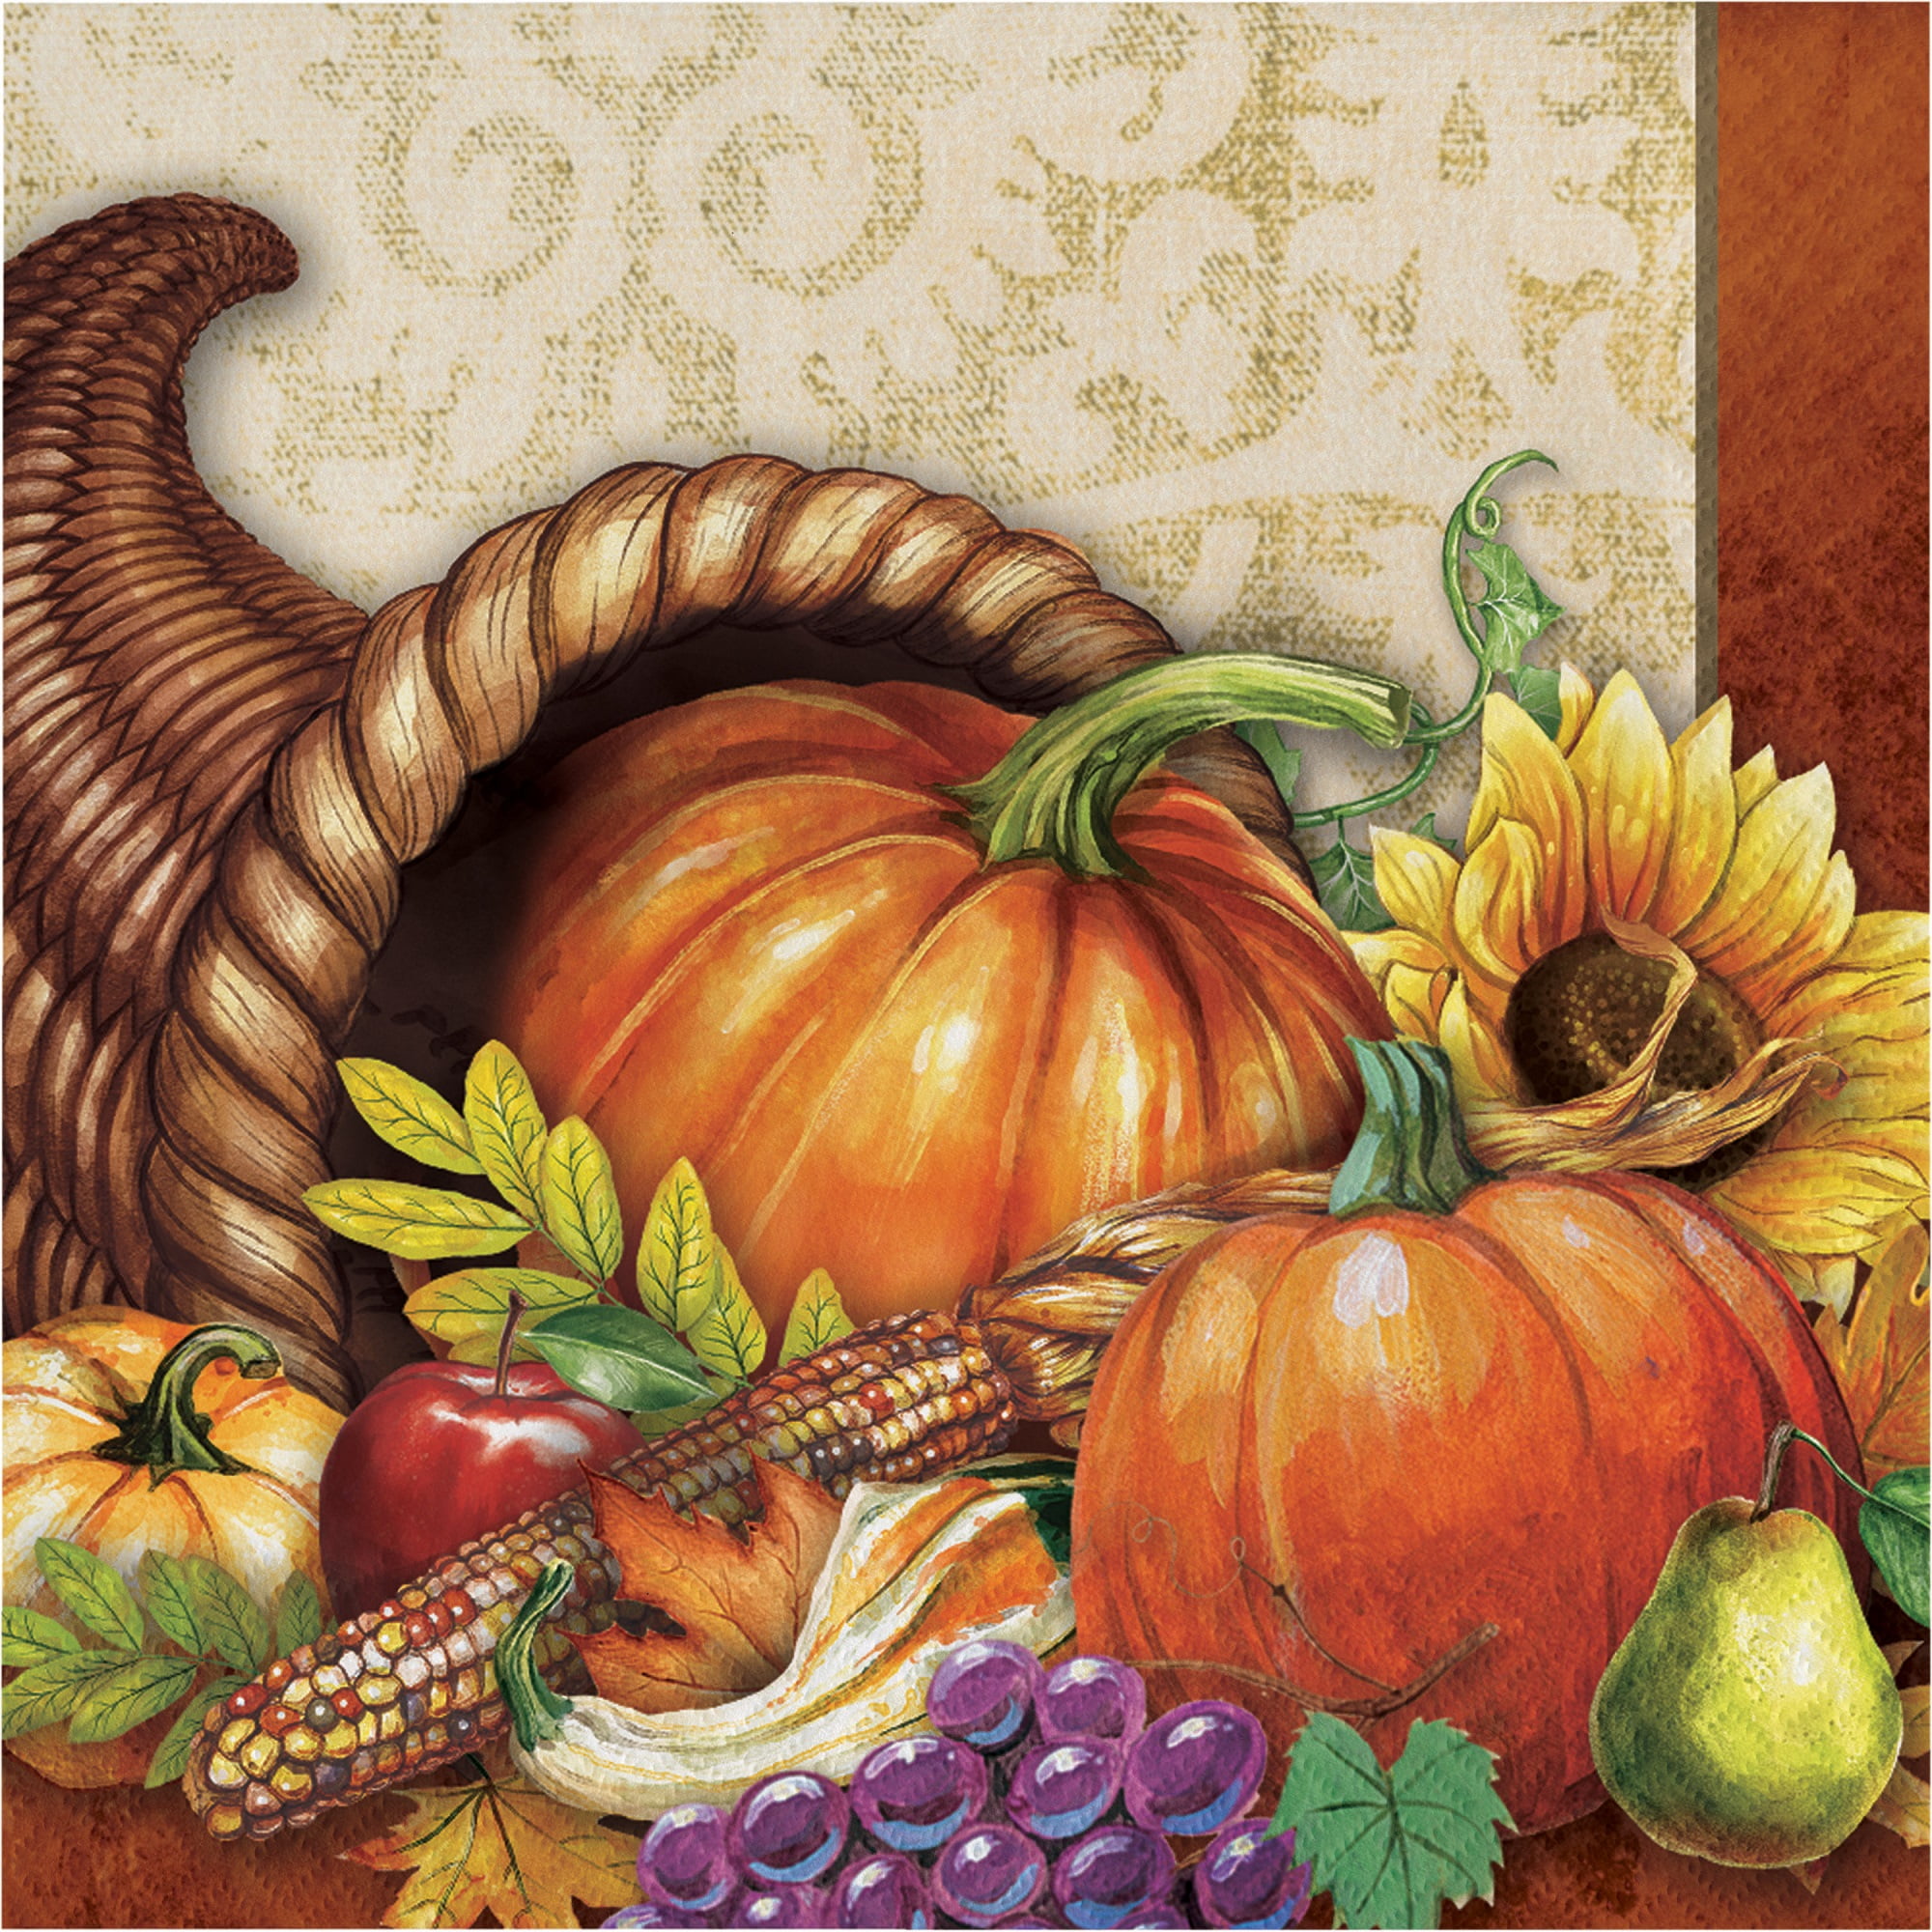 Includes 1 Cornucopia Center Piece and 2 packs ofGive Thanks Beverage Napkins Fall Party Bundle of 3